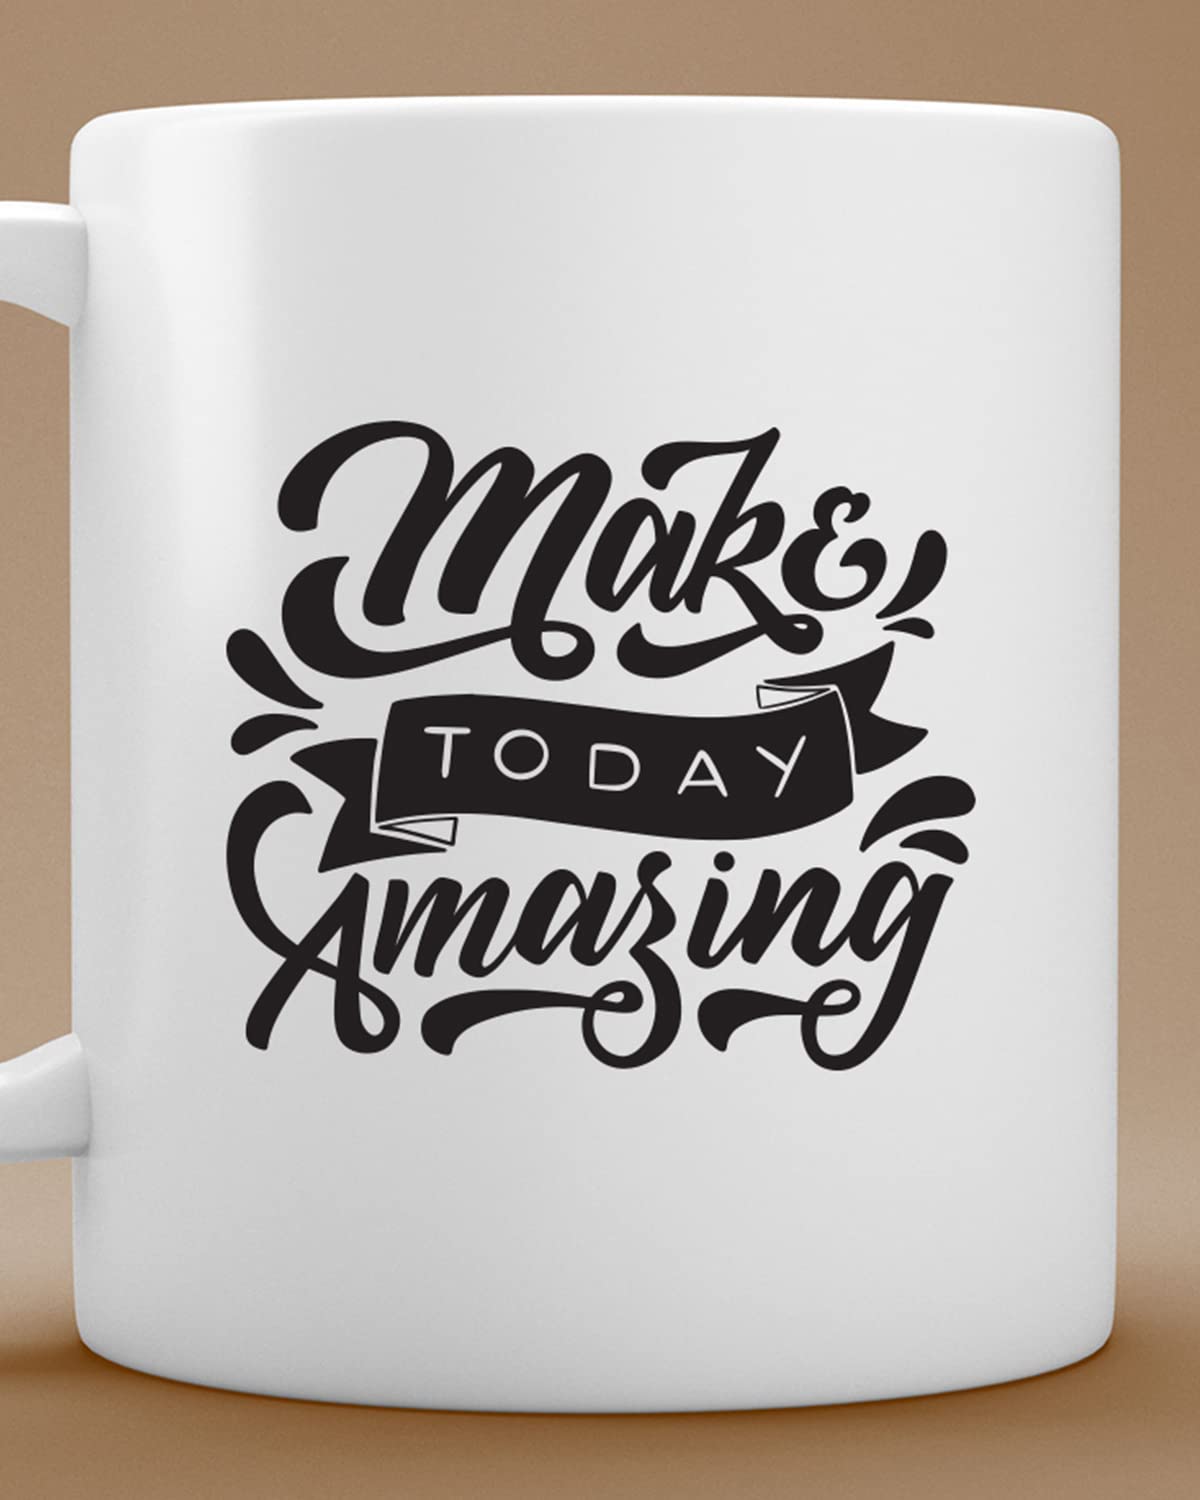 The Pink Magnet Make Today Amazing Coffee Mug - Valentines Day Gift for Wife Husband Girlfriend Boyfriend | Romantic Printed Coffee Mug for Birthday, Anniversary Gift, Valentine's Day Gift, for Someone Special inspiring gifts for boyfriend